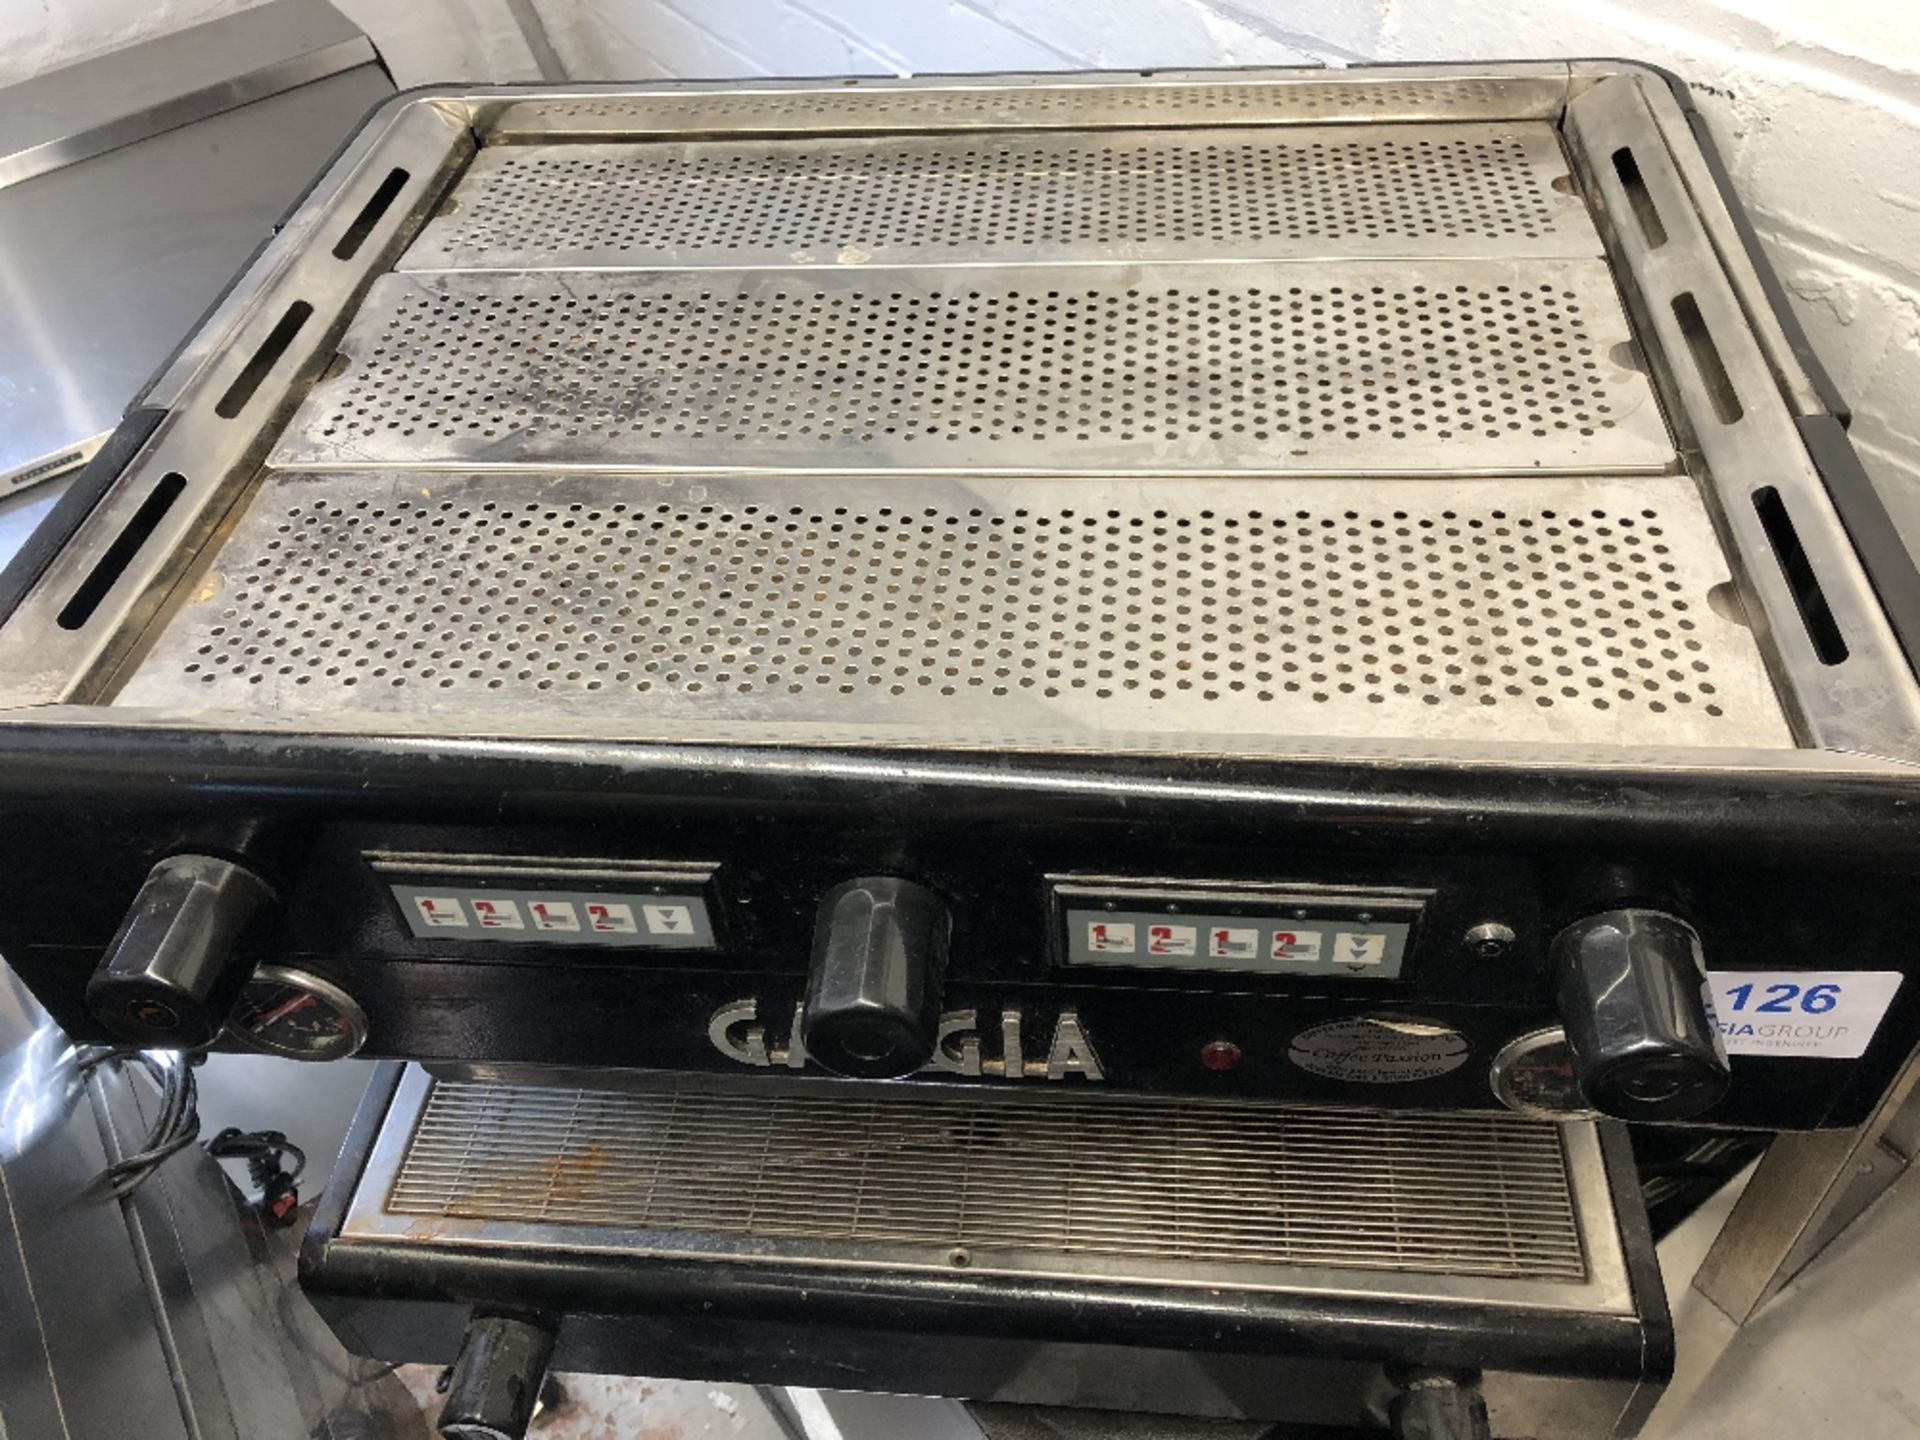 Gaggia D90 2 Group Commercial Coffee Machine - Image 2 of 3